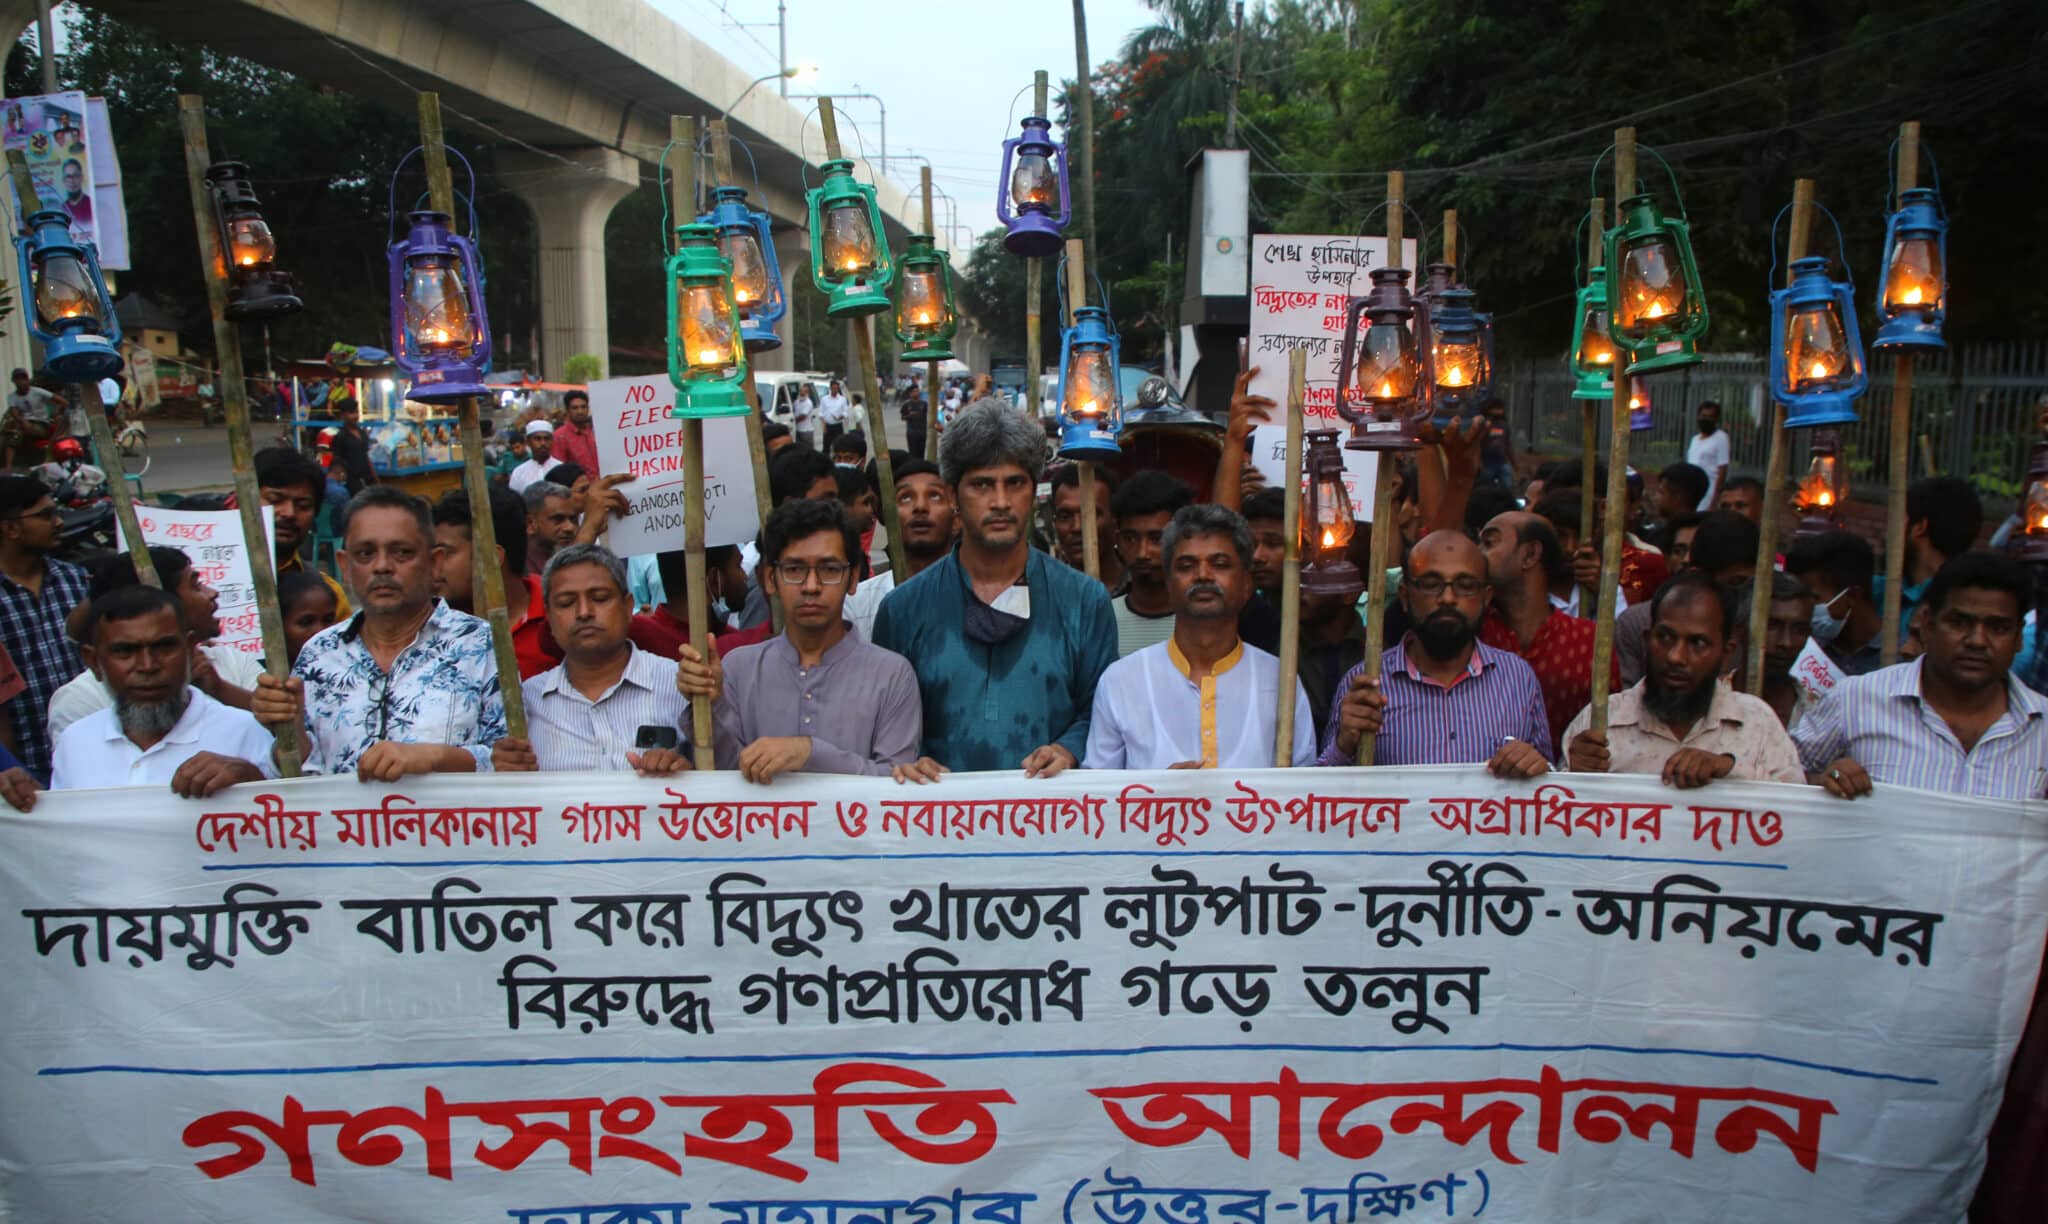 People protesting against power cuts in Bangladesh